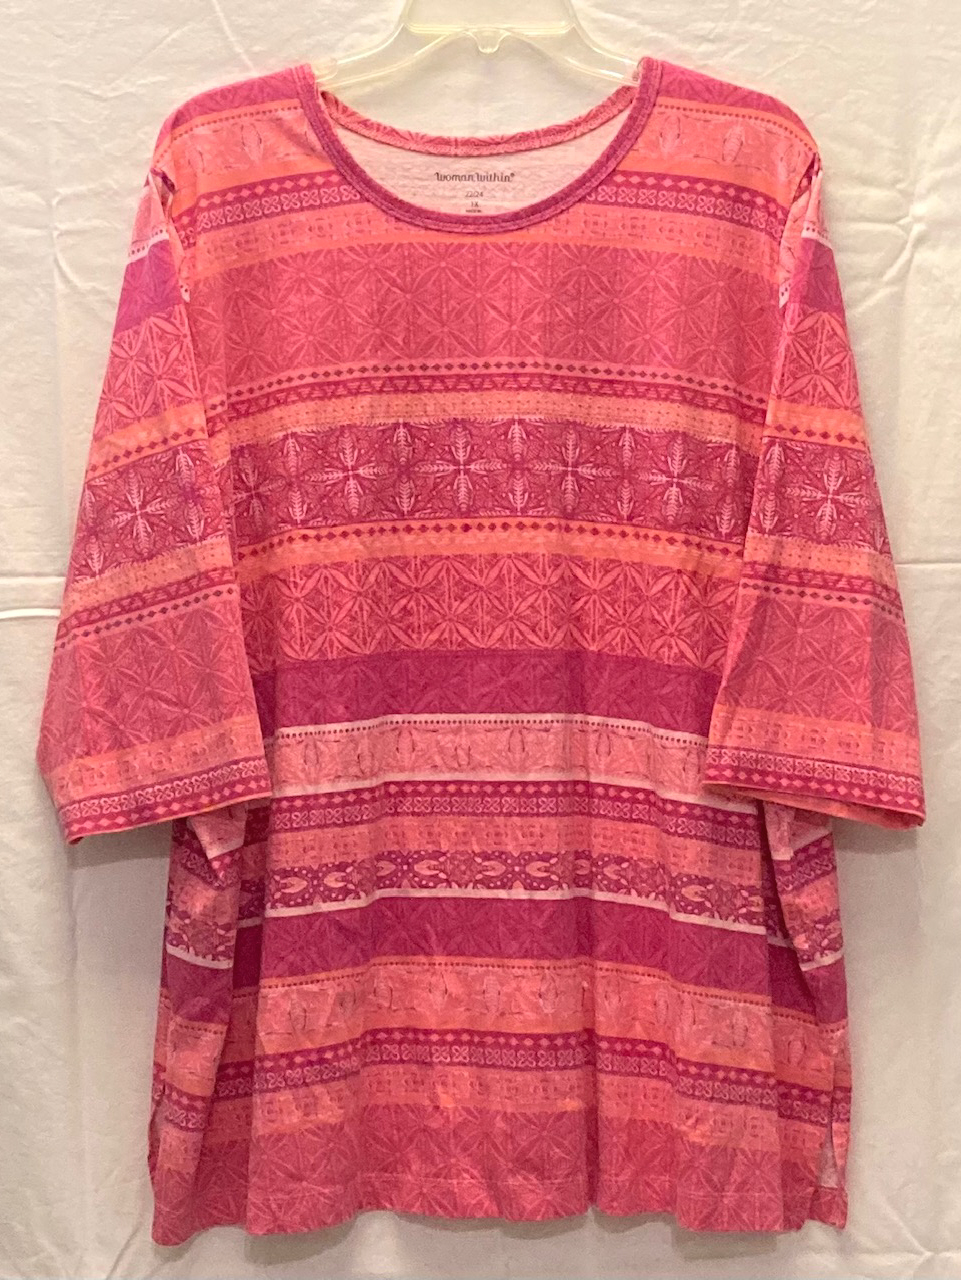 Primary image for Woman Within knit top plus size 1X 22-24 more like 2X pink and orange print